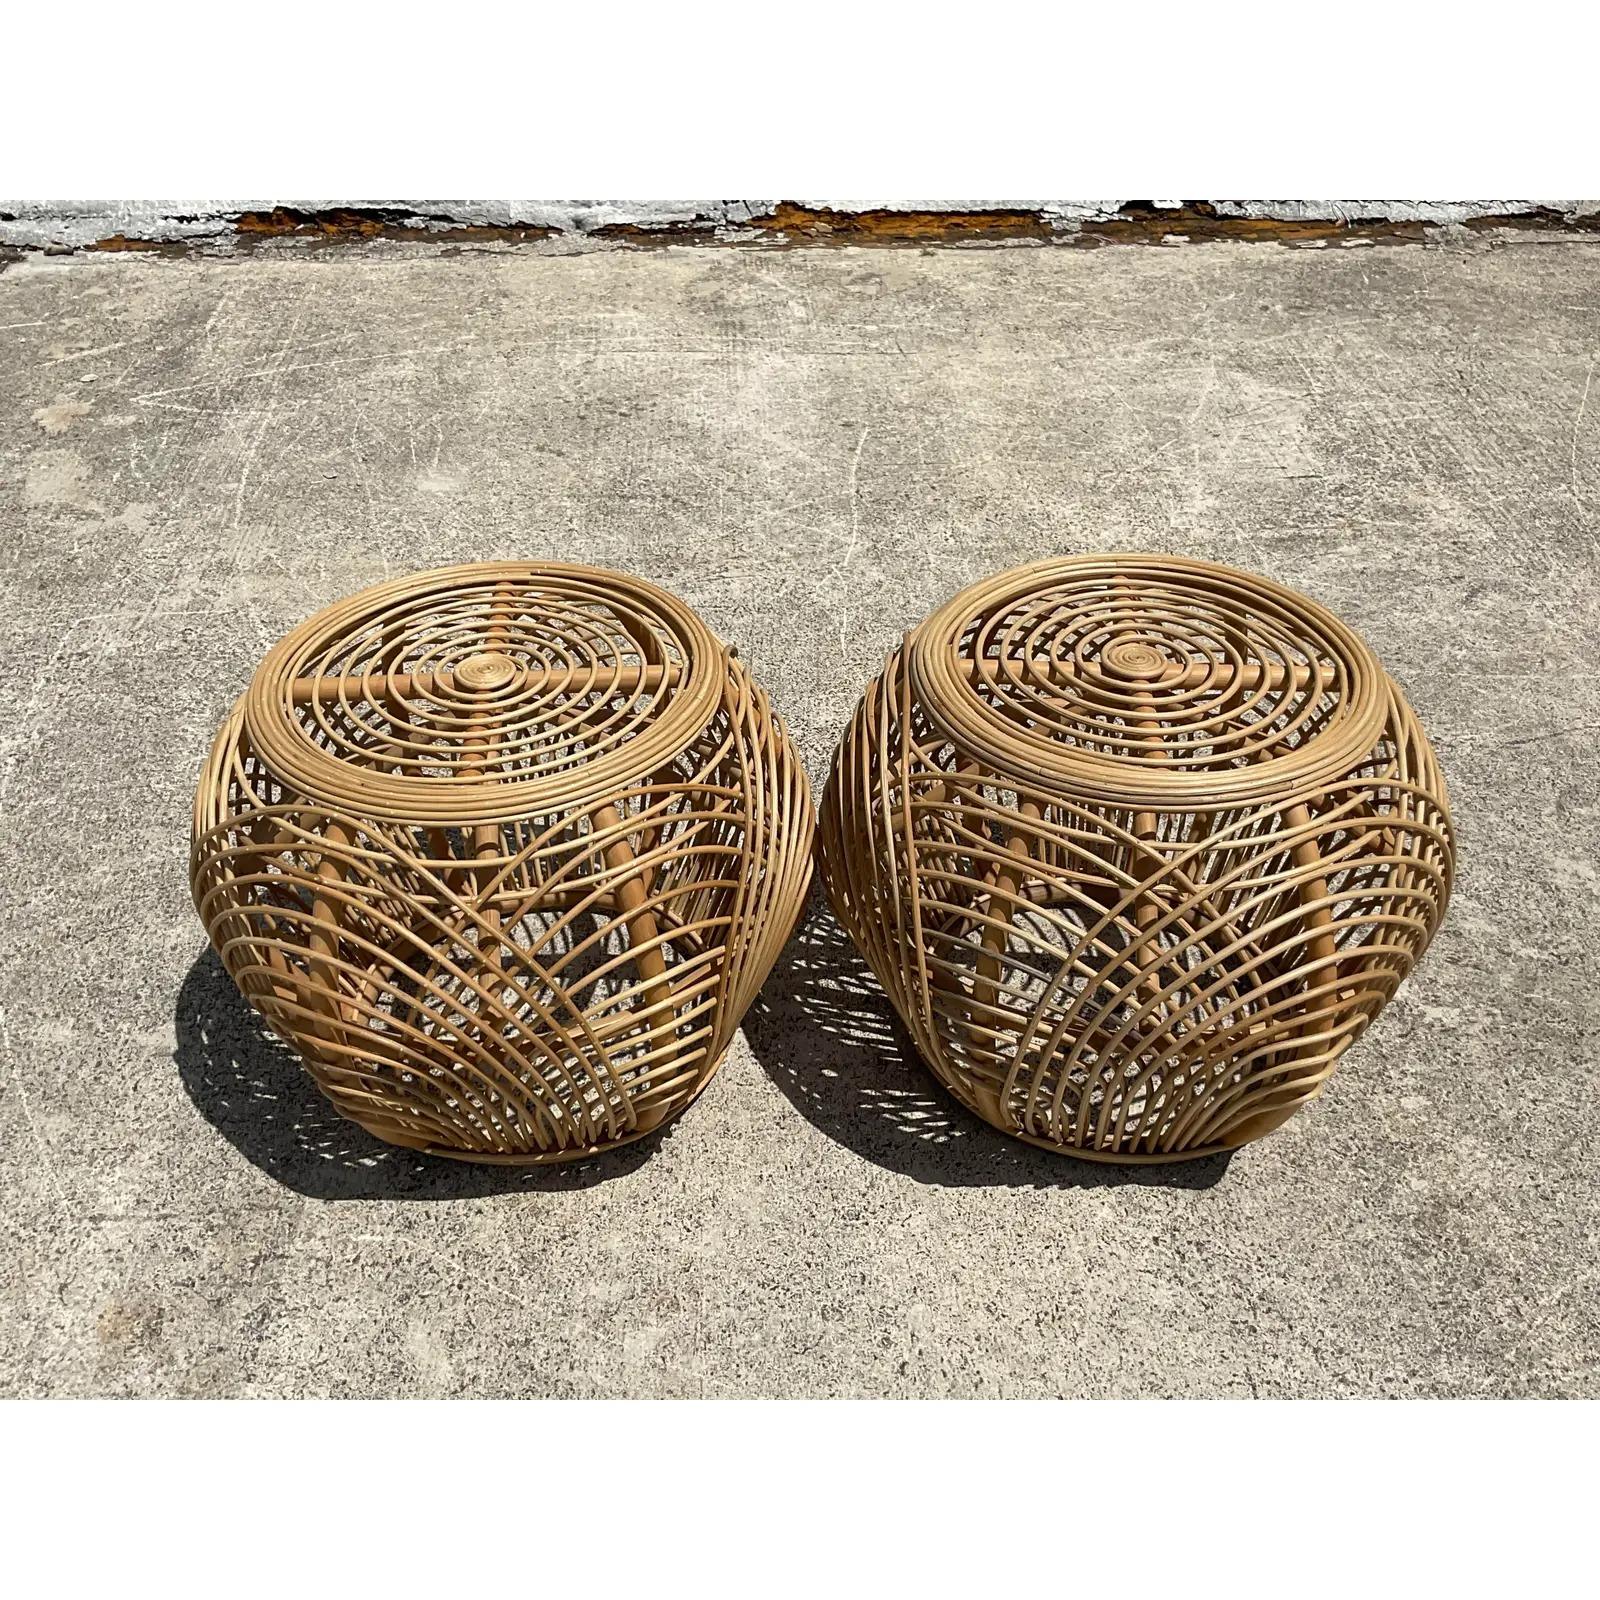 Philippine Vintage Coastal Arched Rattan Drinks Table, a Pair